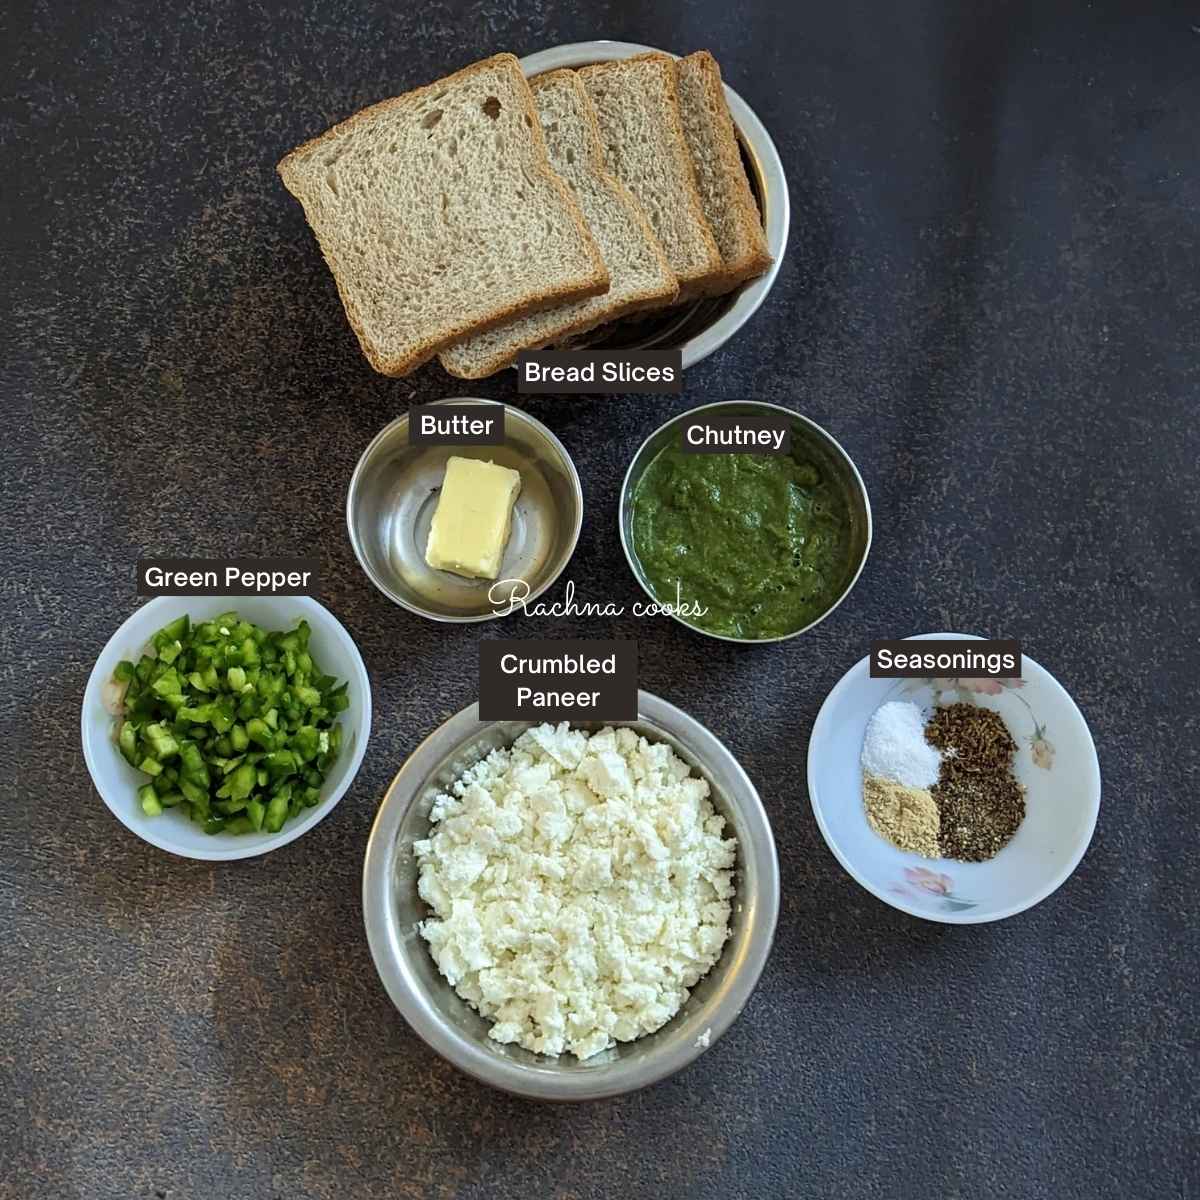 The ingredients for paneer sandwich laid out: Butter, chutney, seasonings, crumbled paneer, green pepper and bread slices.